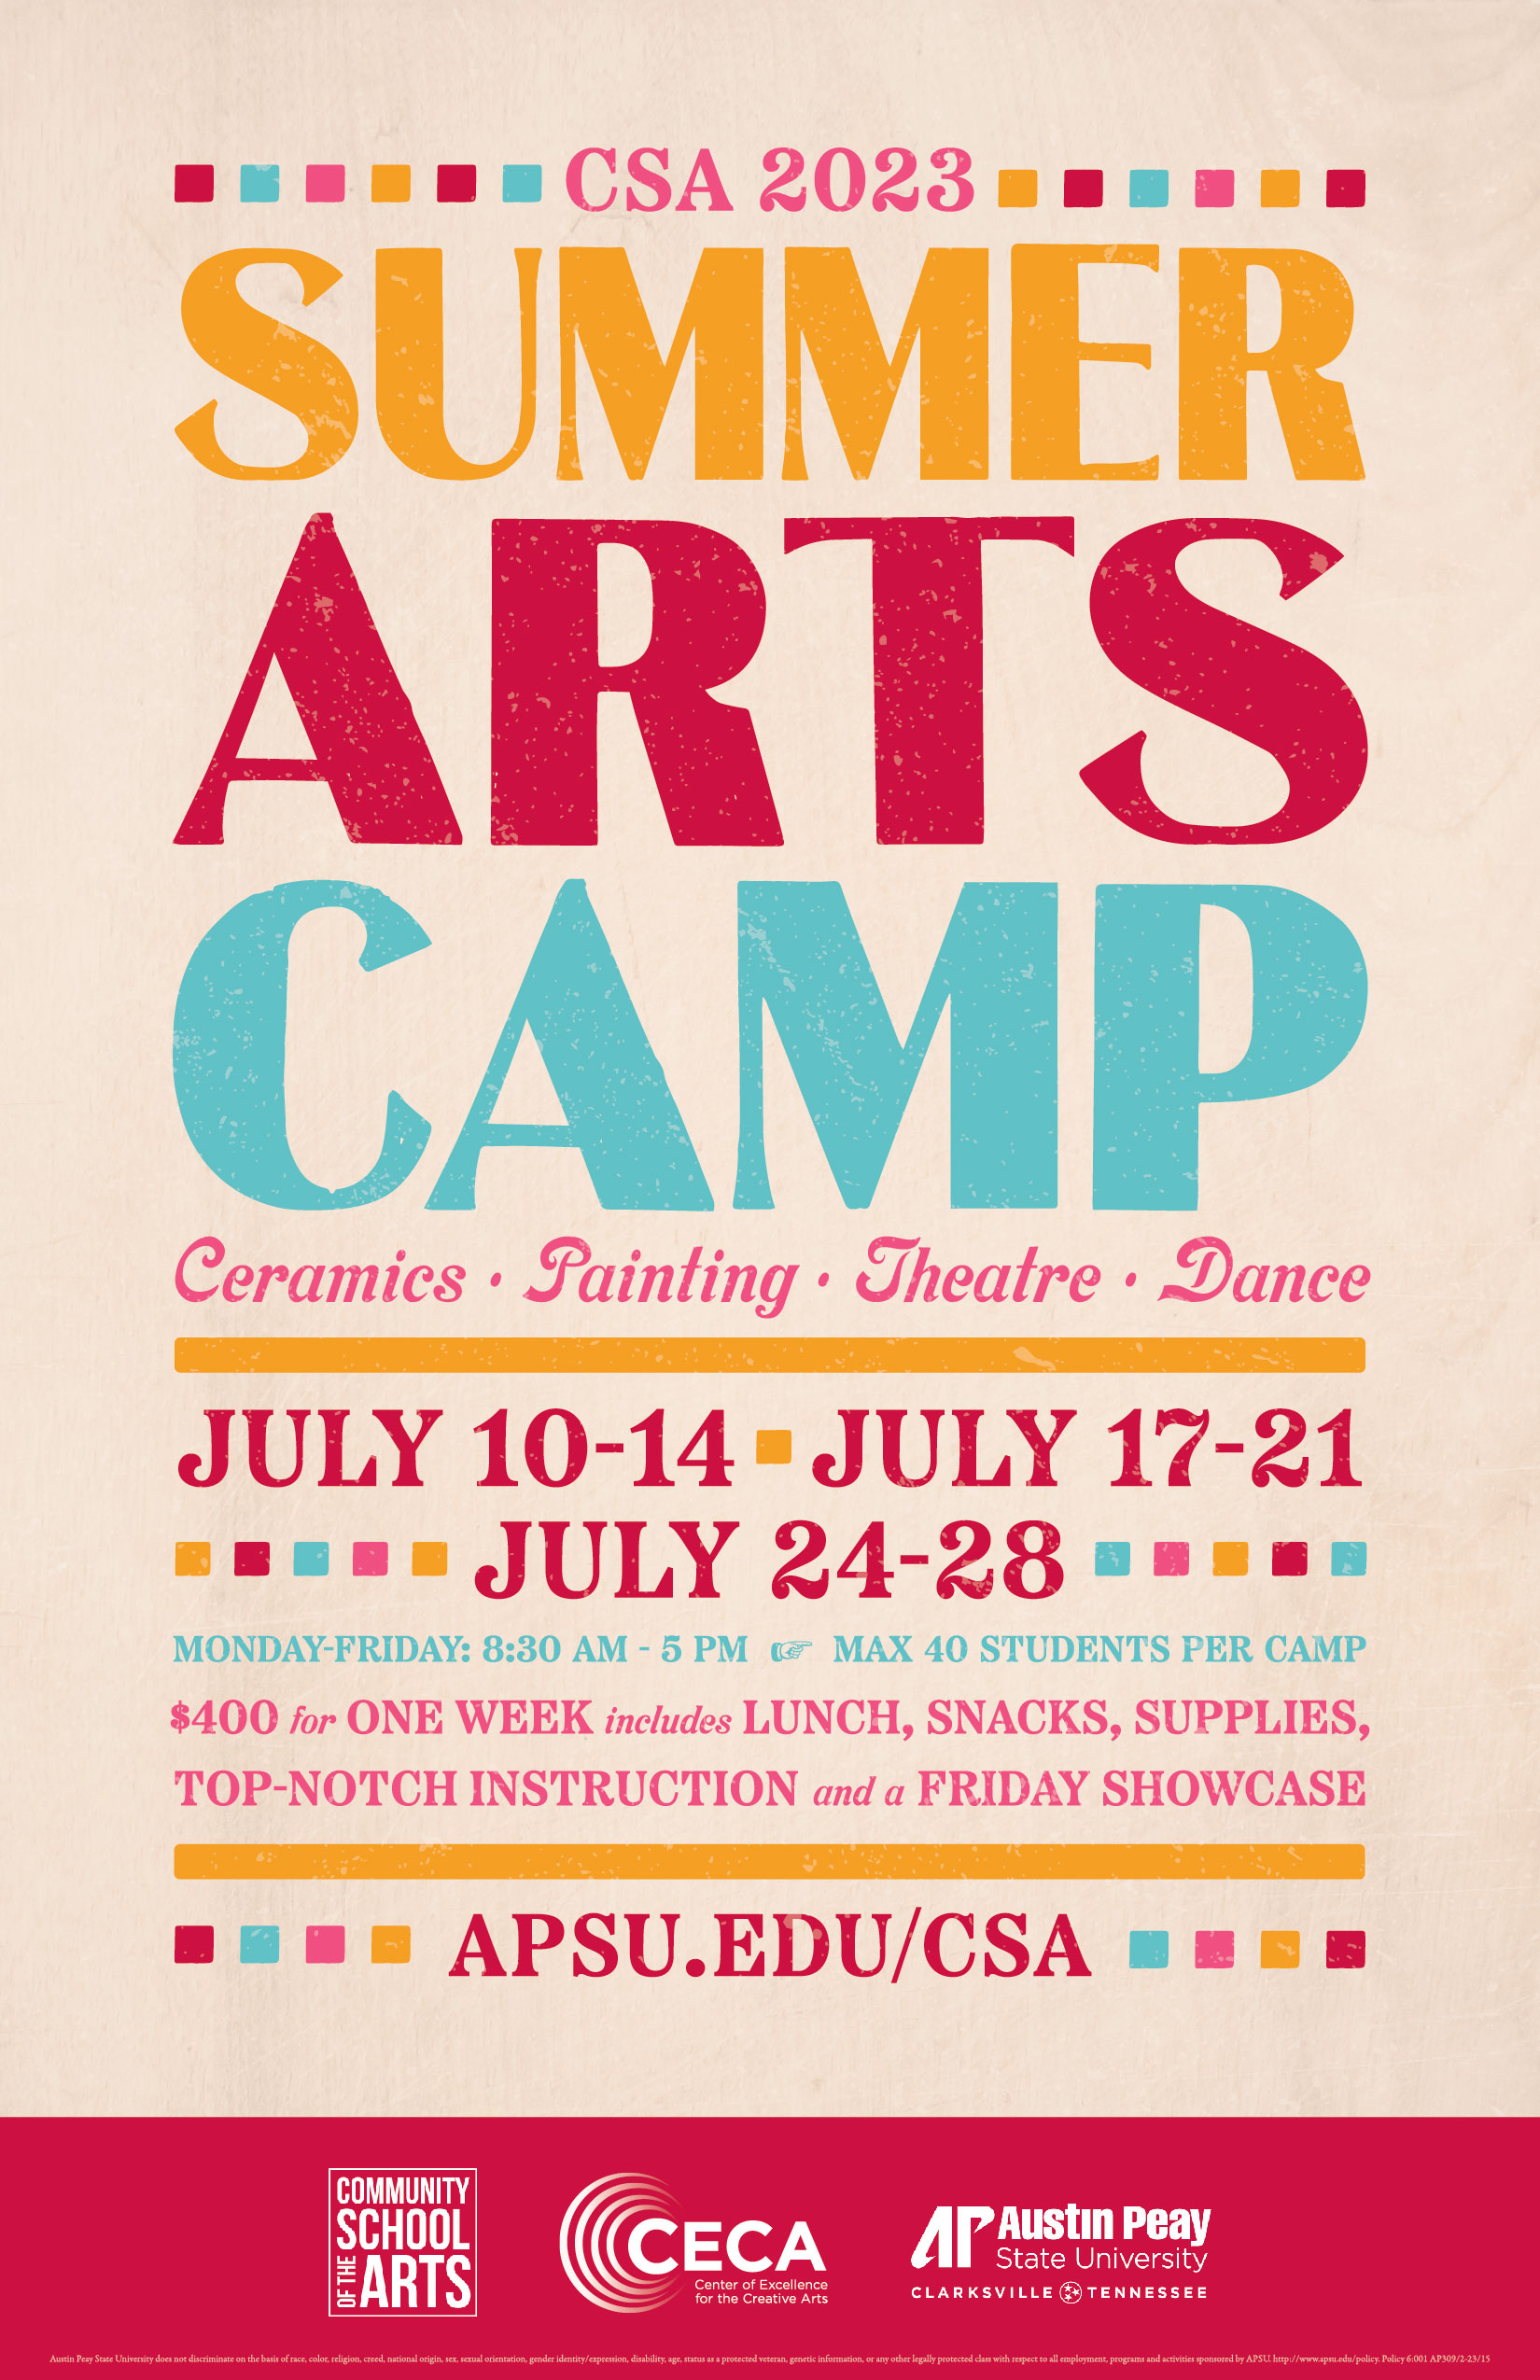 A poster outlining the schedule for this year's Summer Arts Camp at APSU's Community School of the Arts.